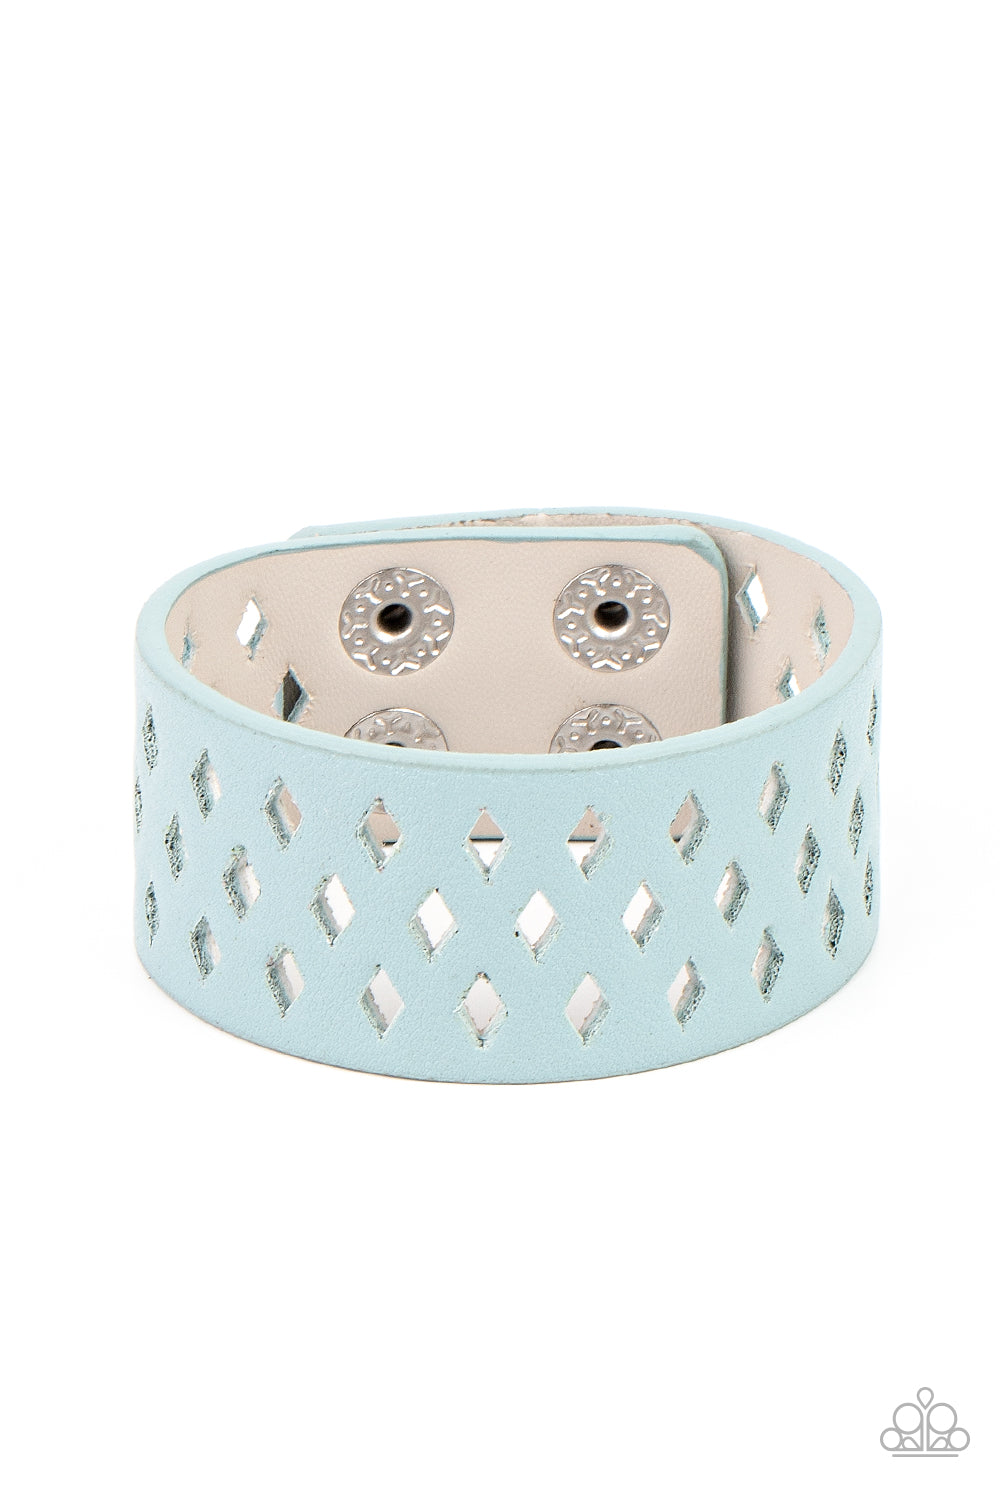 A wide blue leather band is filled with patterned rows of small diamond-shaped cutouts giving the illusion of diamonds floating across the wrist in a whimsical fashion. Features an adjustable snap closure.